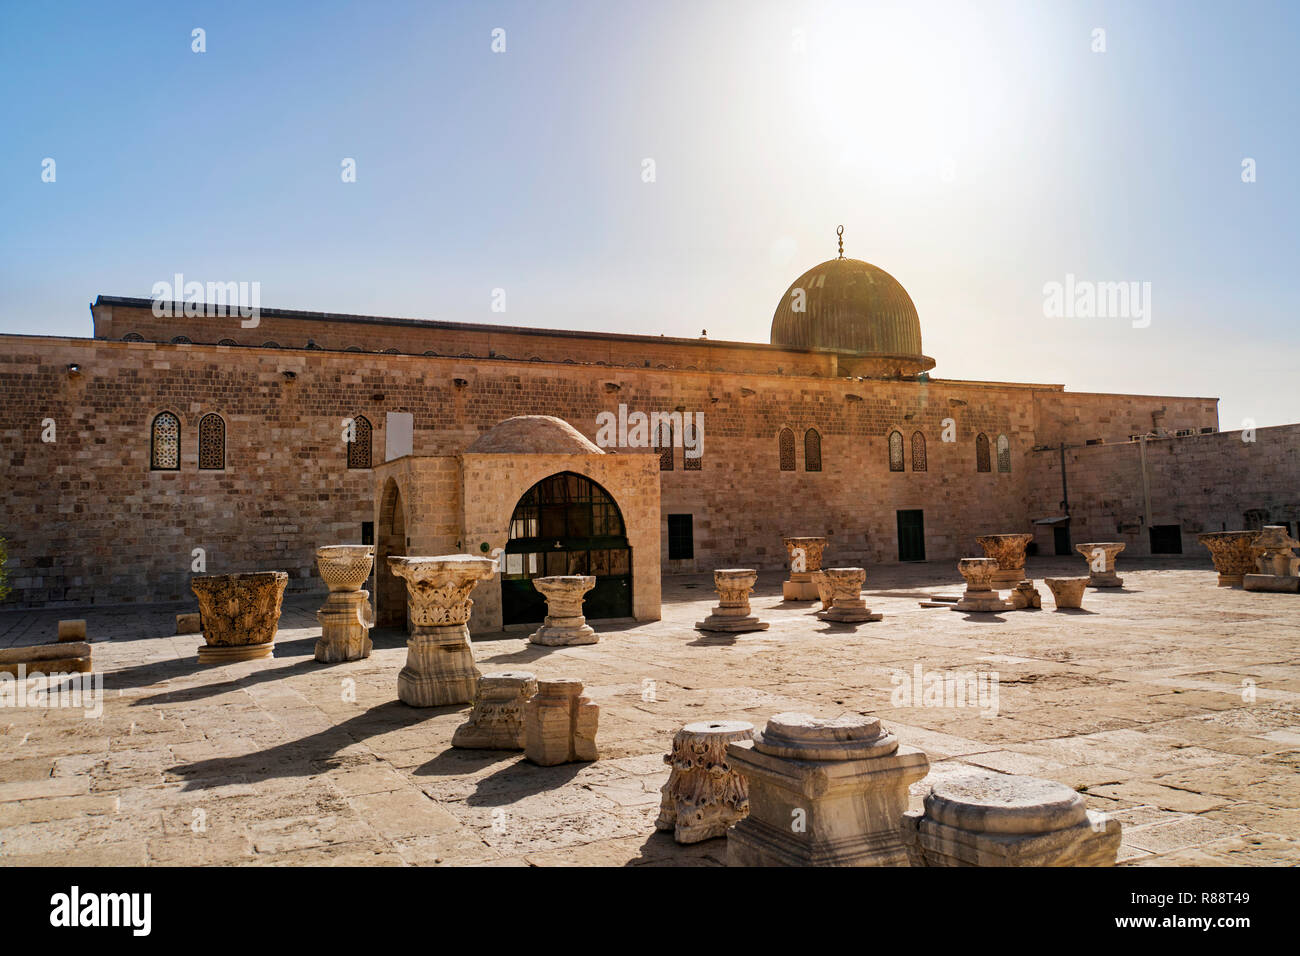 Al-Masjid al-Aqsa is a mosque located on temple mount of Jerusalem. Is the third holiest site in Islam after Masjid al-Haram in Mecca and Prophet's Mo Stock Photo